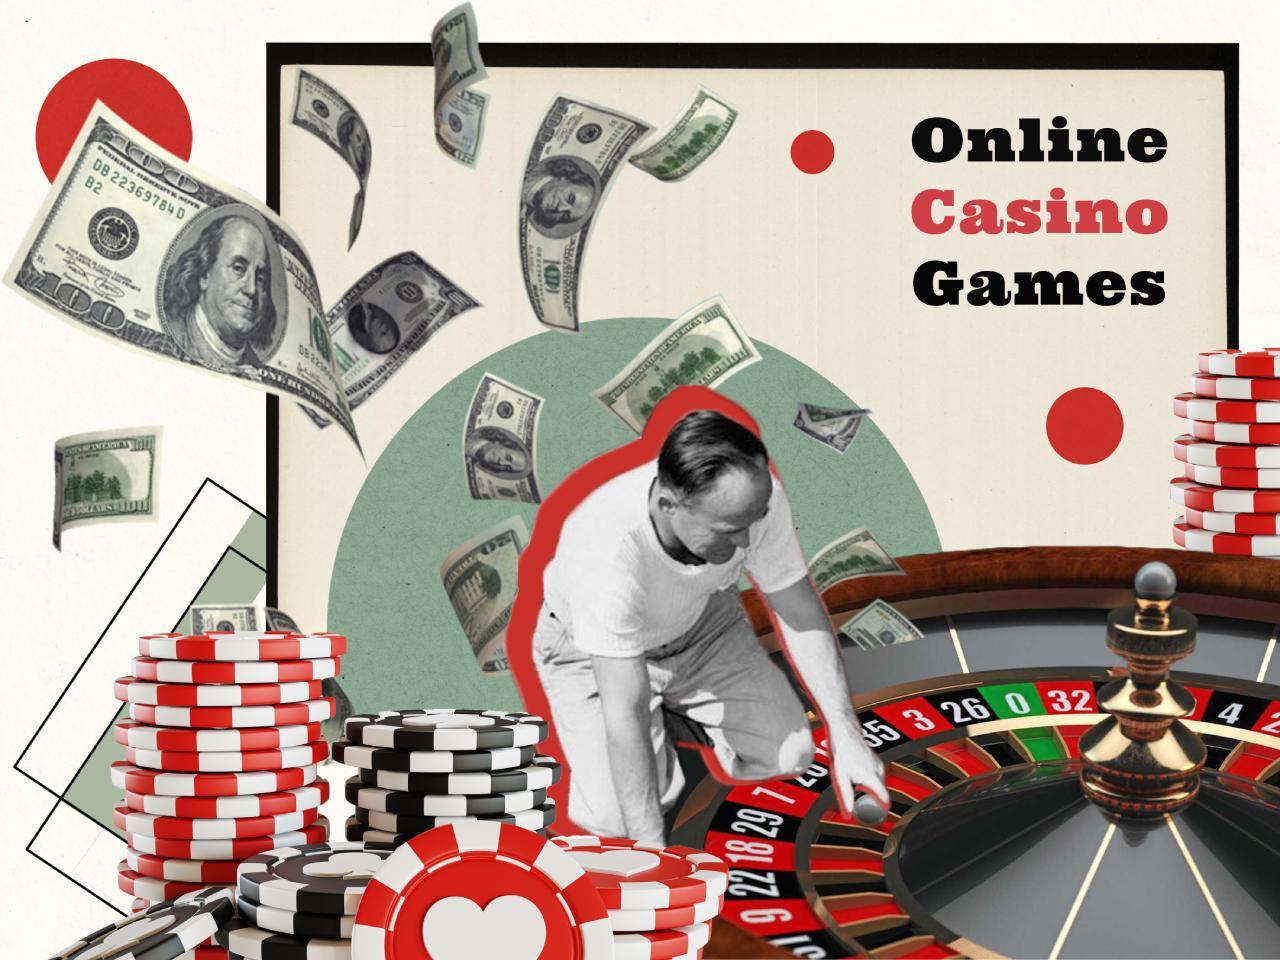 Free Online Casino Games & Slots: Stand a Chance to Win Real Money